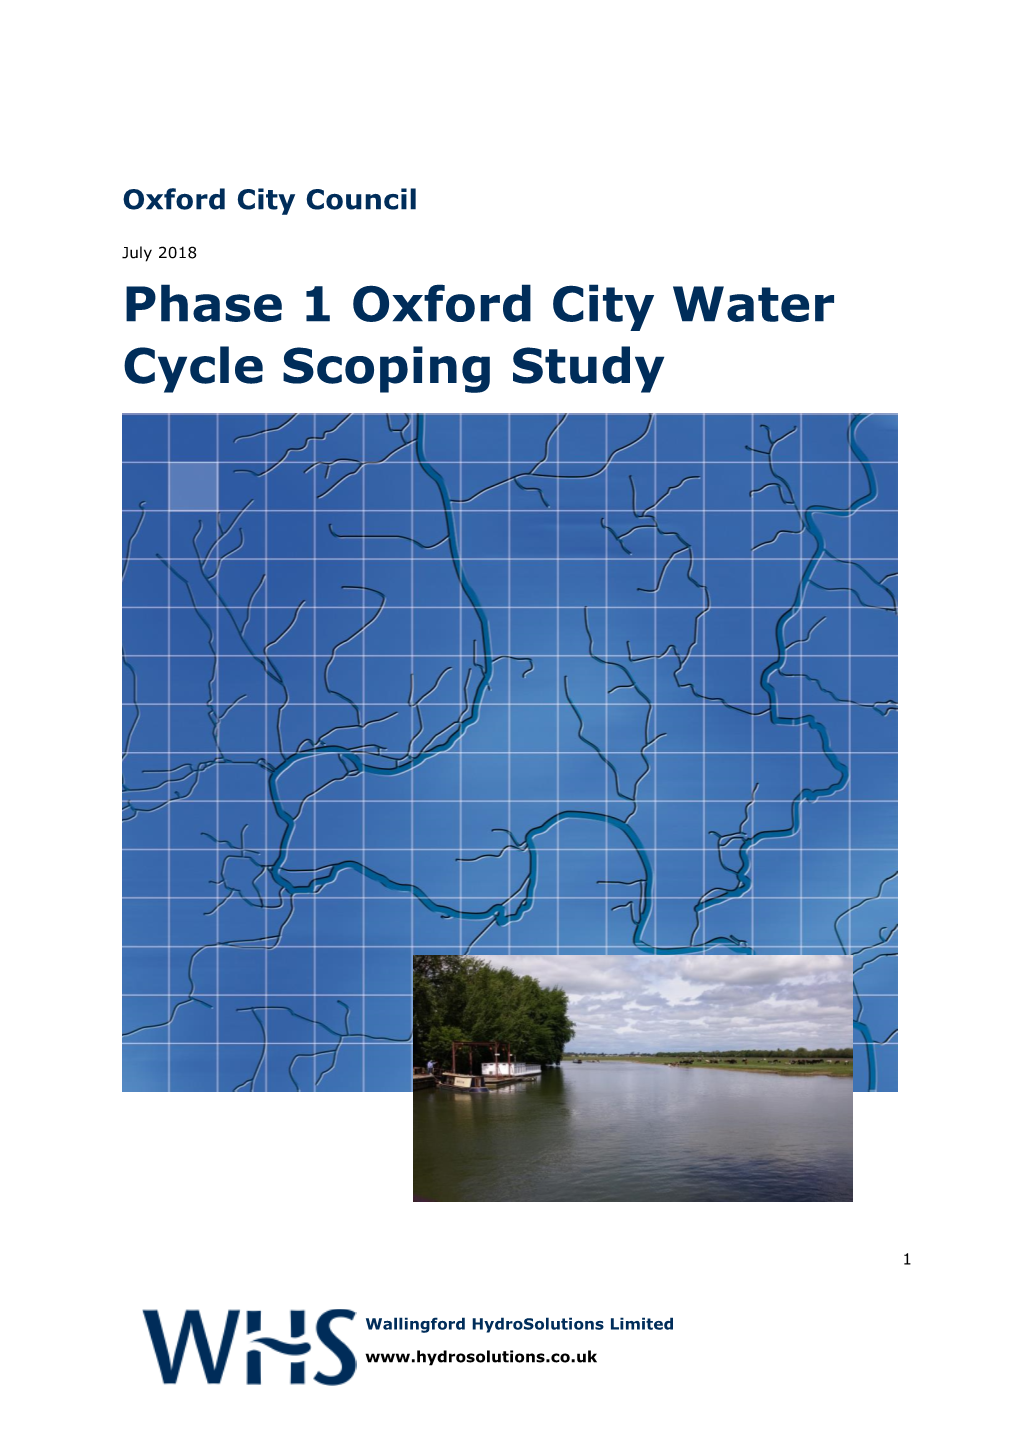 Phase 1 Oxford City Water Cycle Scoping Study